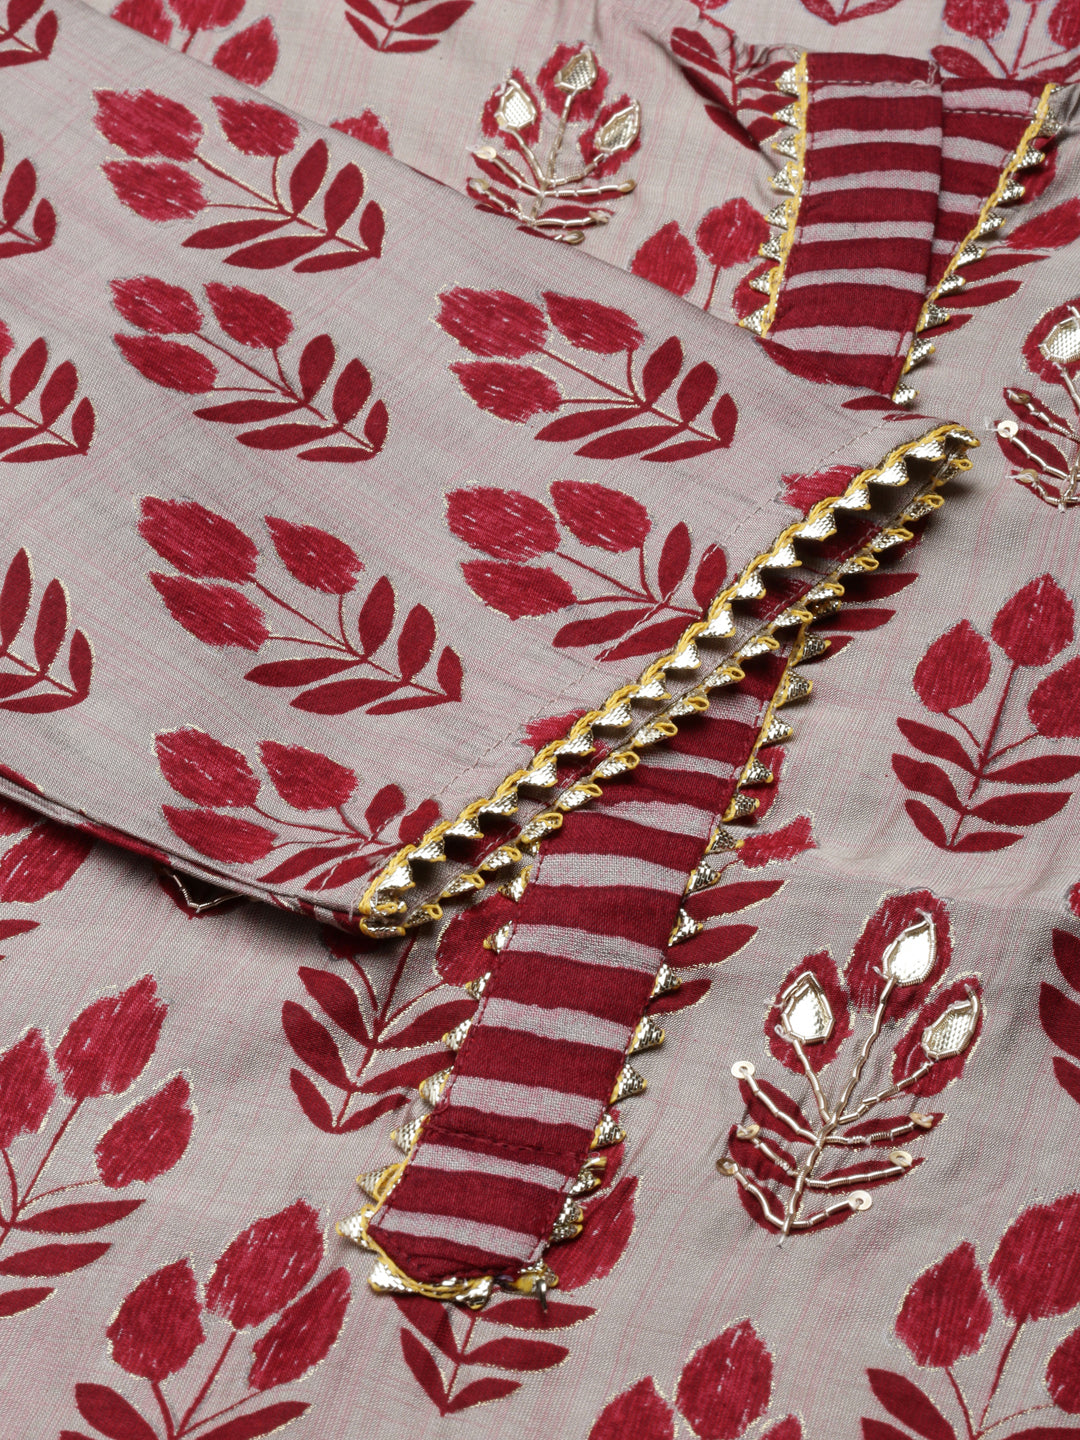 Women Straight Maroon Floral Kurta and Trousers Set Comes With Dupatta